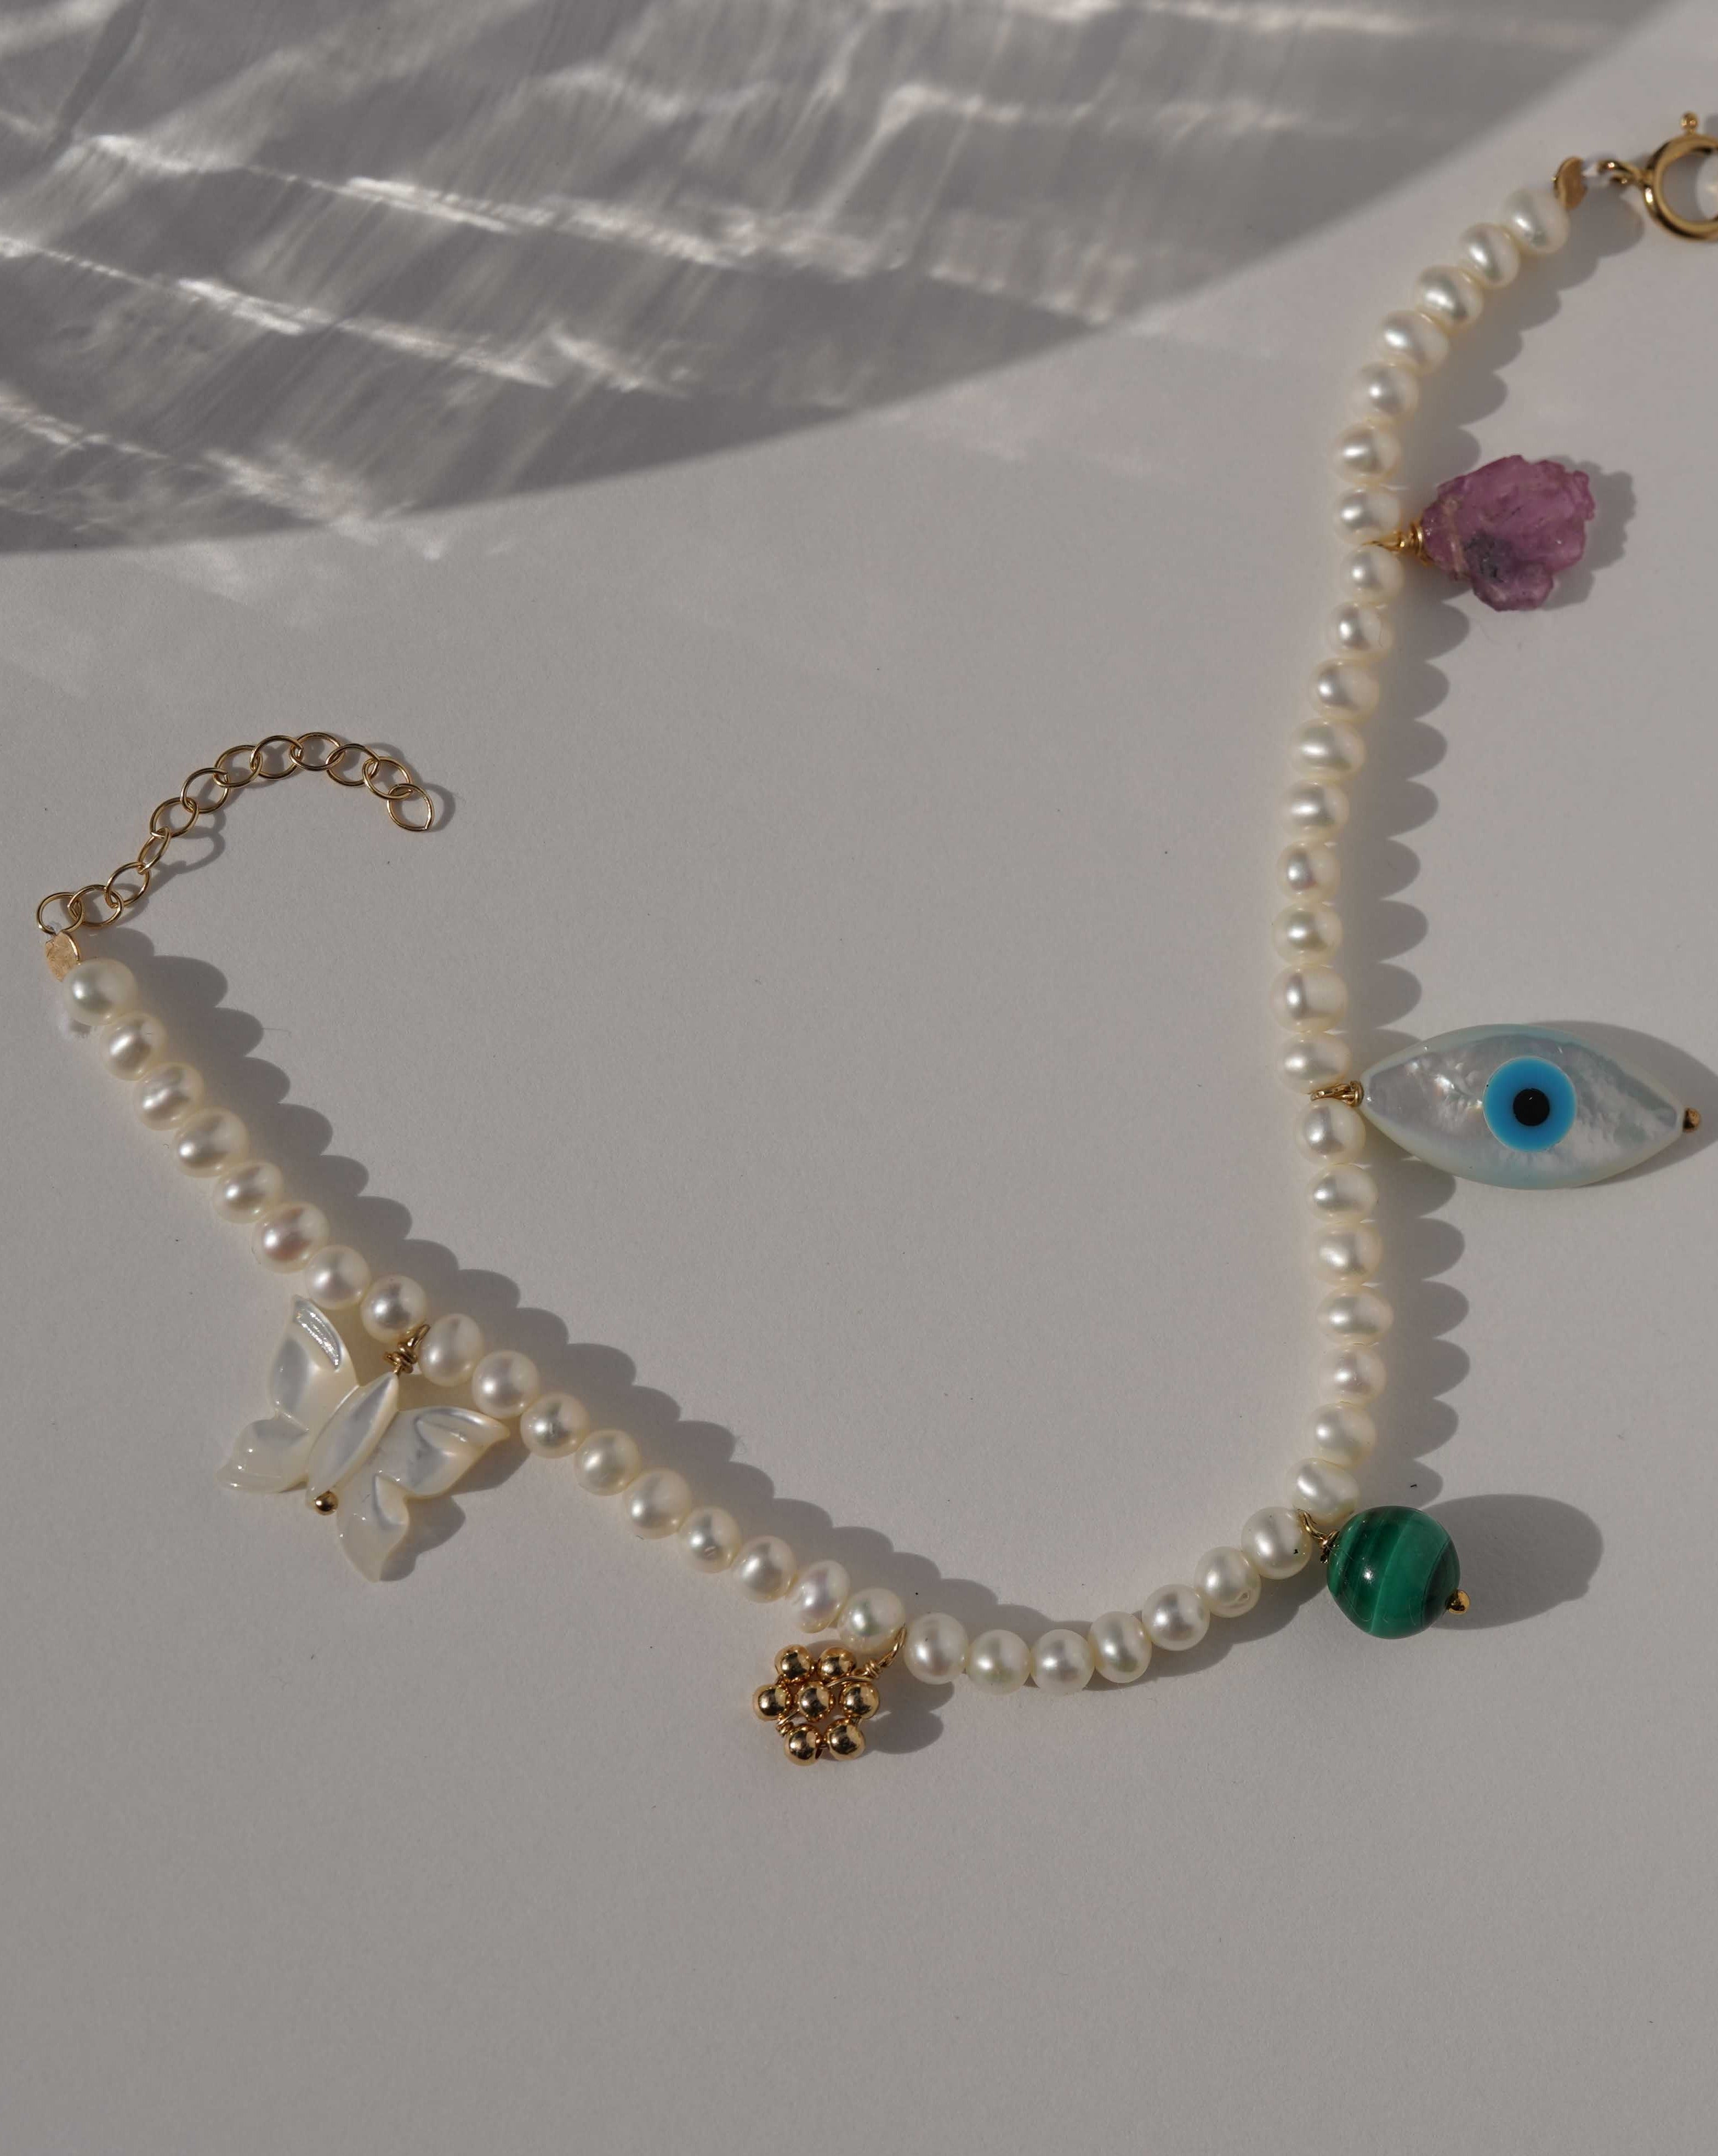 Rylan Bracelet by KOZAKH. A 6 to 7 inch adjustable length, 3mm freshwater pearl strand bracelet, crafted in 14K Gold Filled, featuring a Pink Tourmaline slice, a Mother of Pearl butterfly charm, a round Malachite gemstone, and Mother of Pearl evil eye charm. 